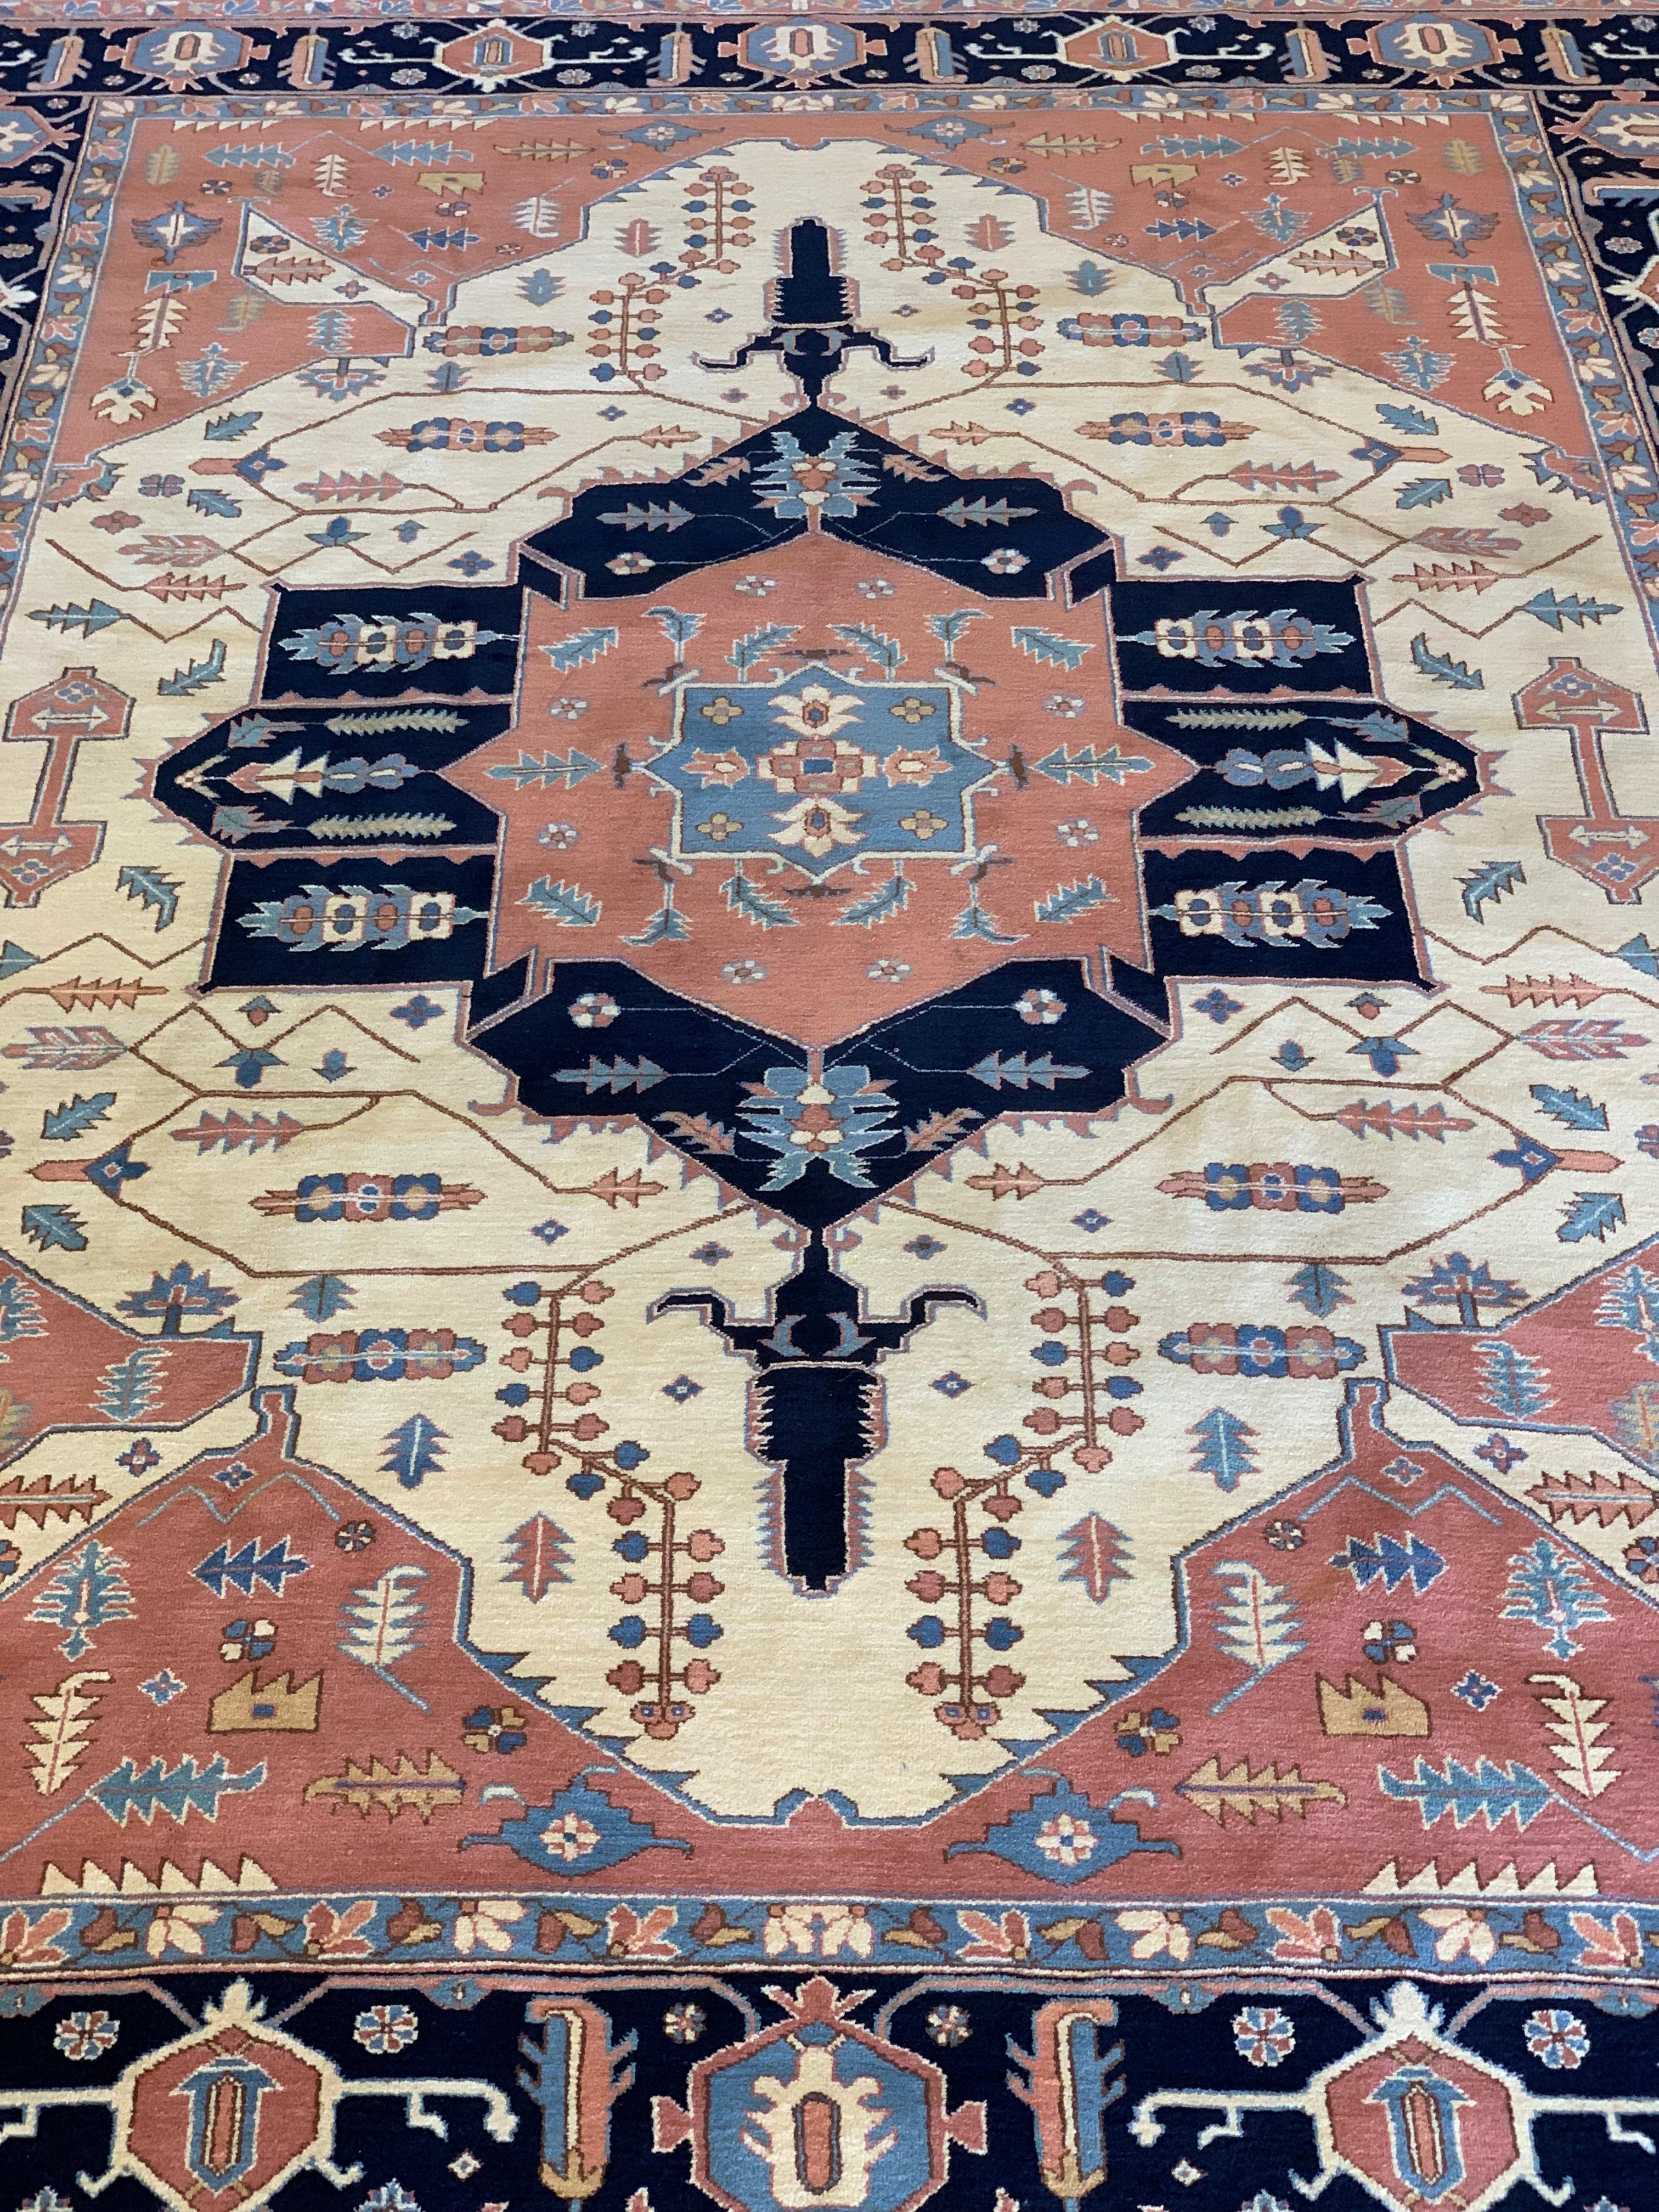 This is a signed, vintage hand-knotted Persian Serapi rug, probably woven in Romania, circa 1940s. It is wool knots on cotton warp and weft, and is approximately 8’10 x 12’2 ft. We say probably Romania because many people think or say that all